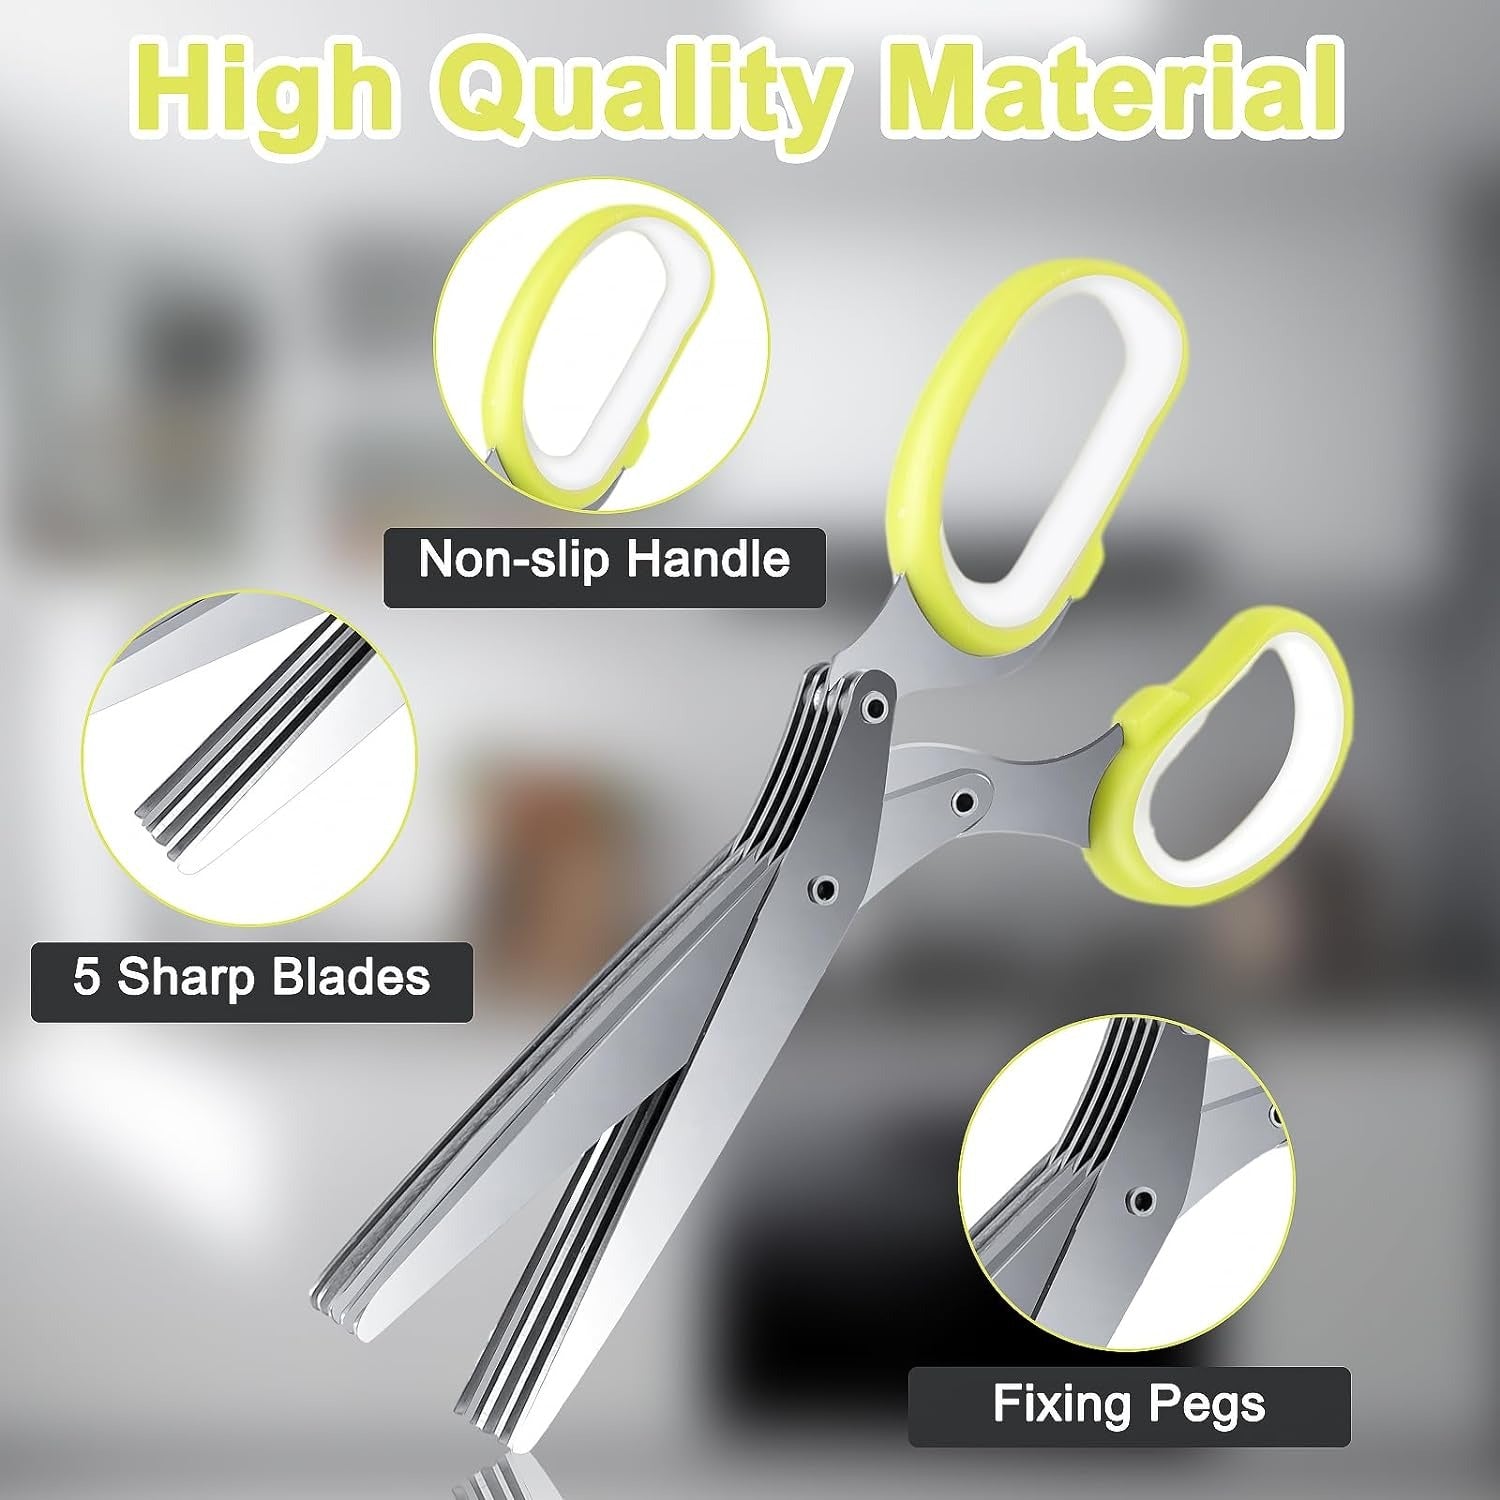 quality material is used in Kitchen Scissor